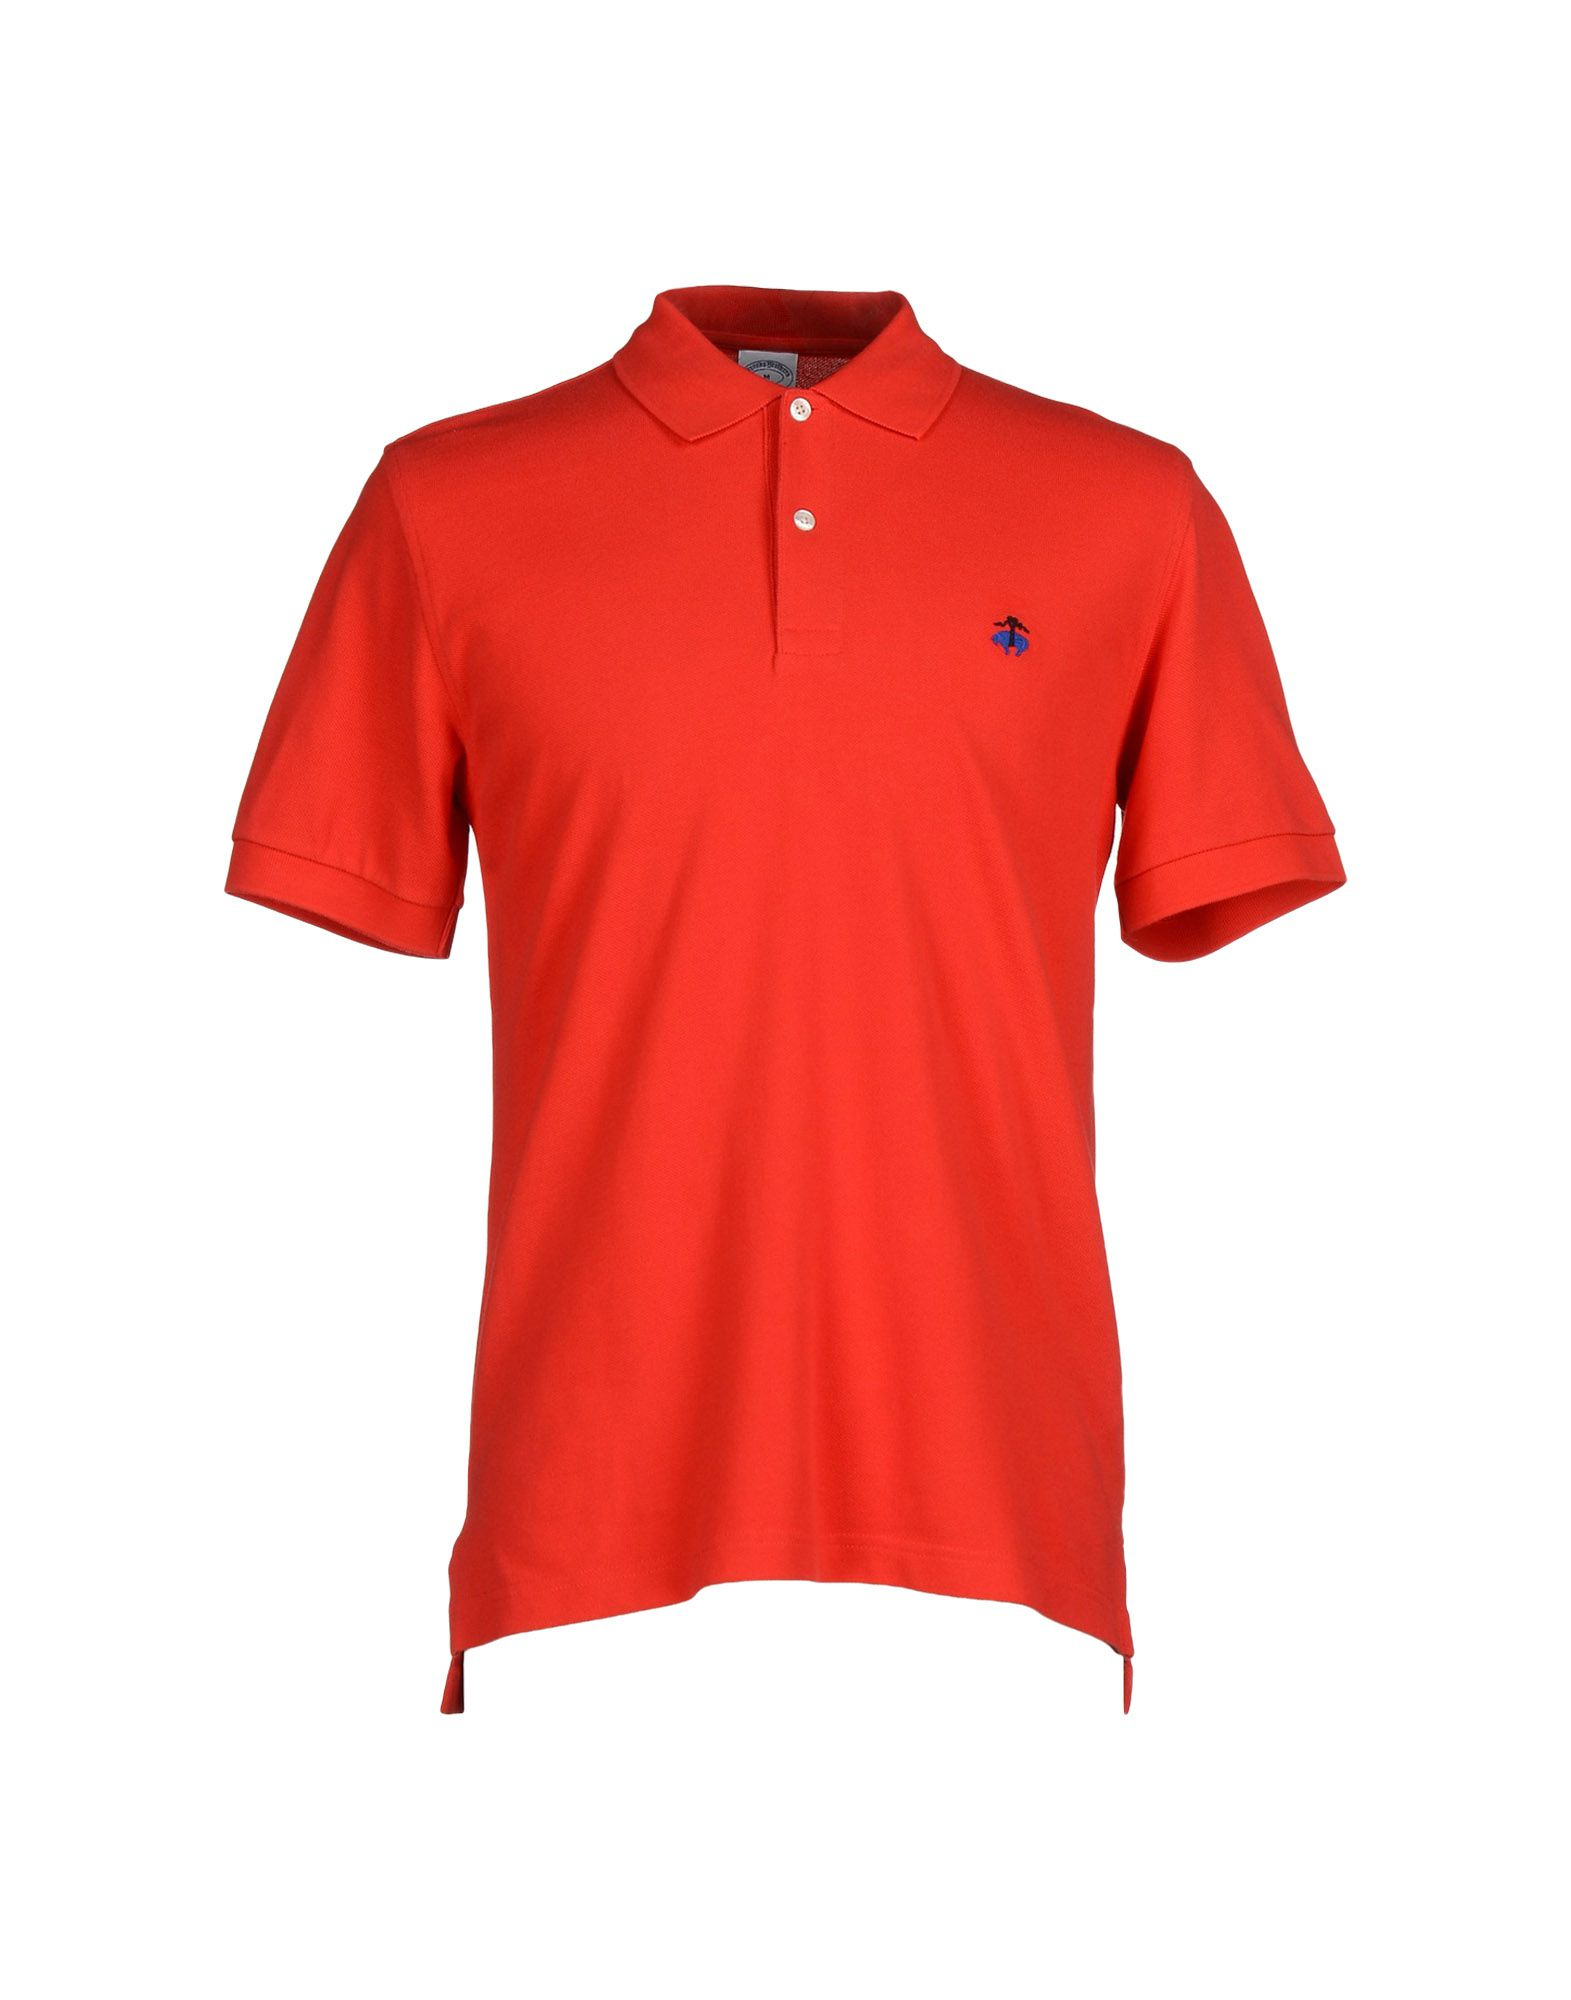 Lyst - Brooks Brothers Polo Shirt in Red for Men